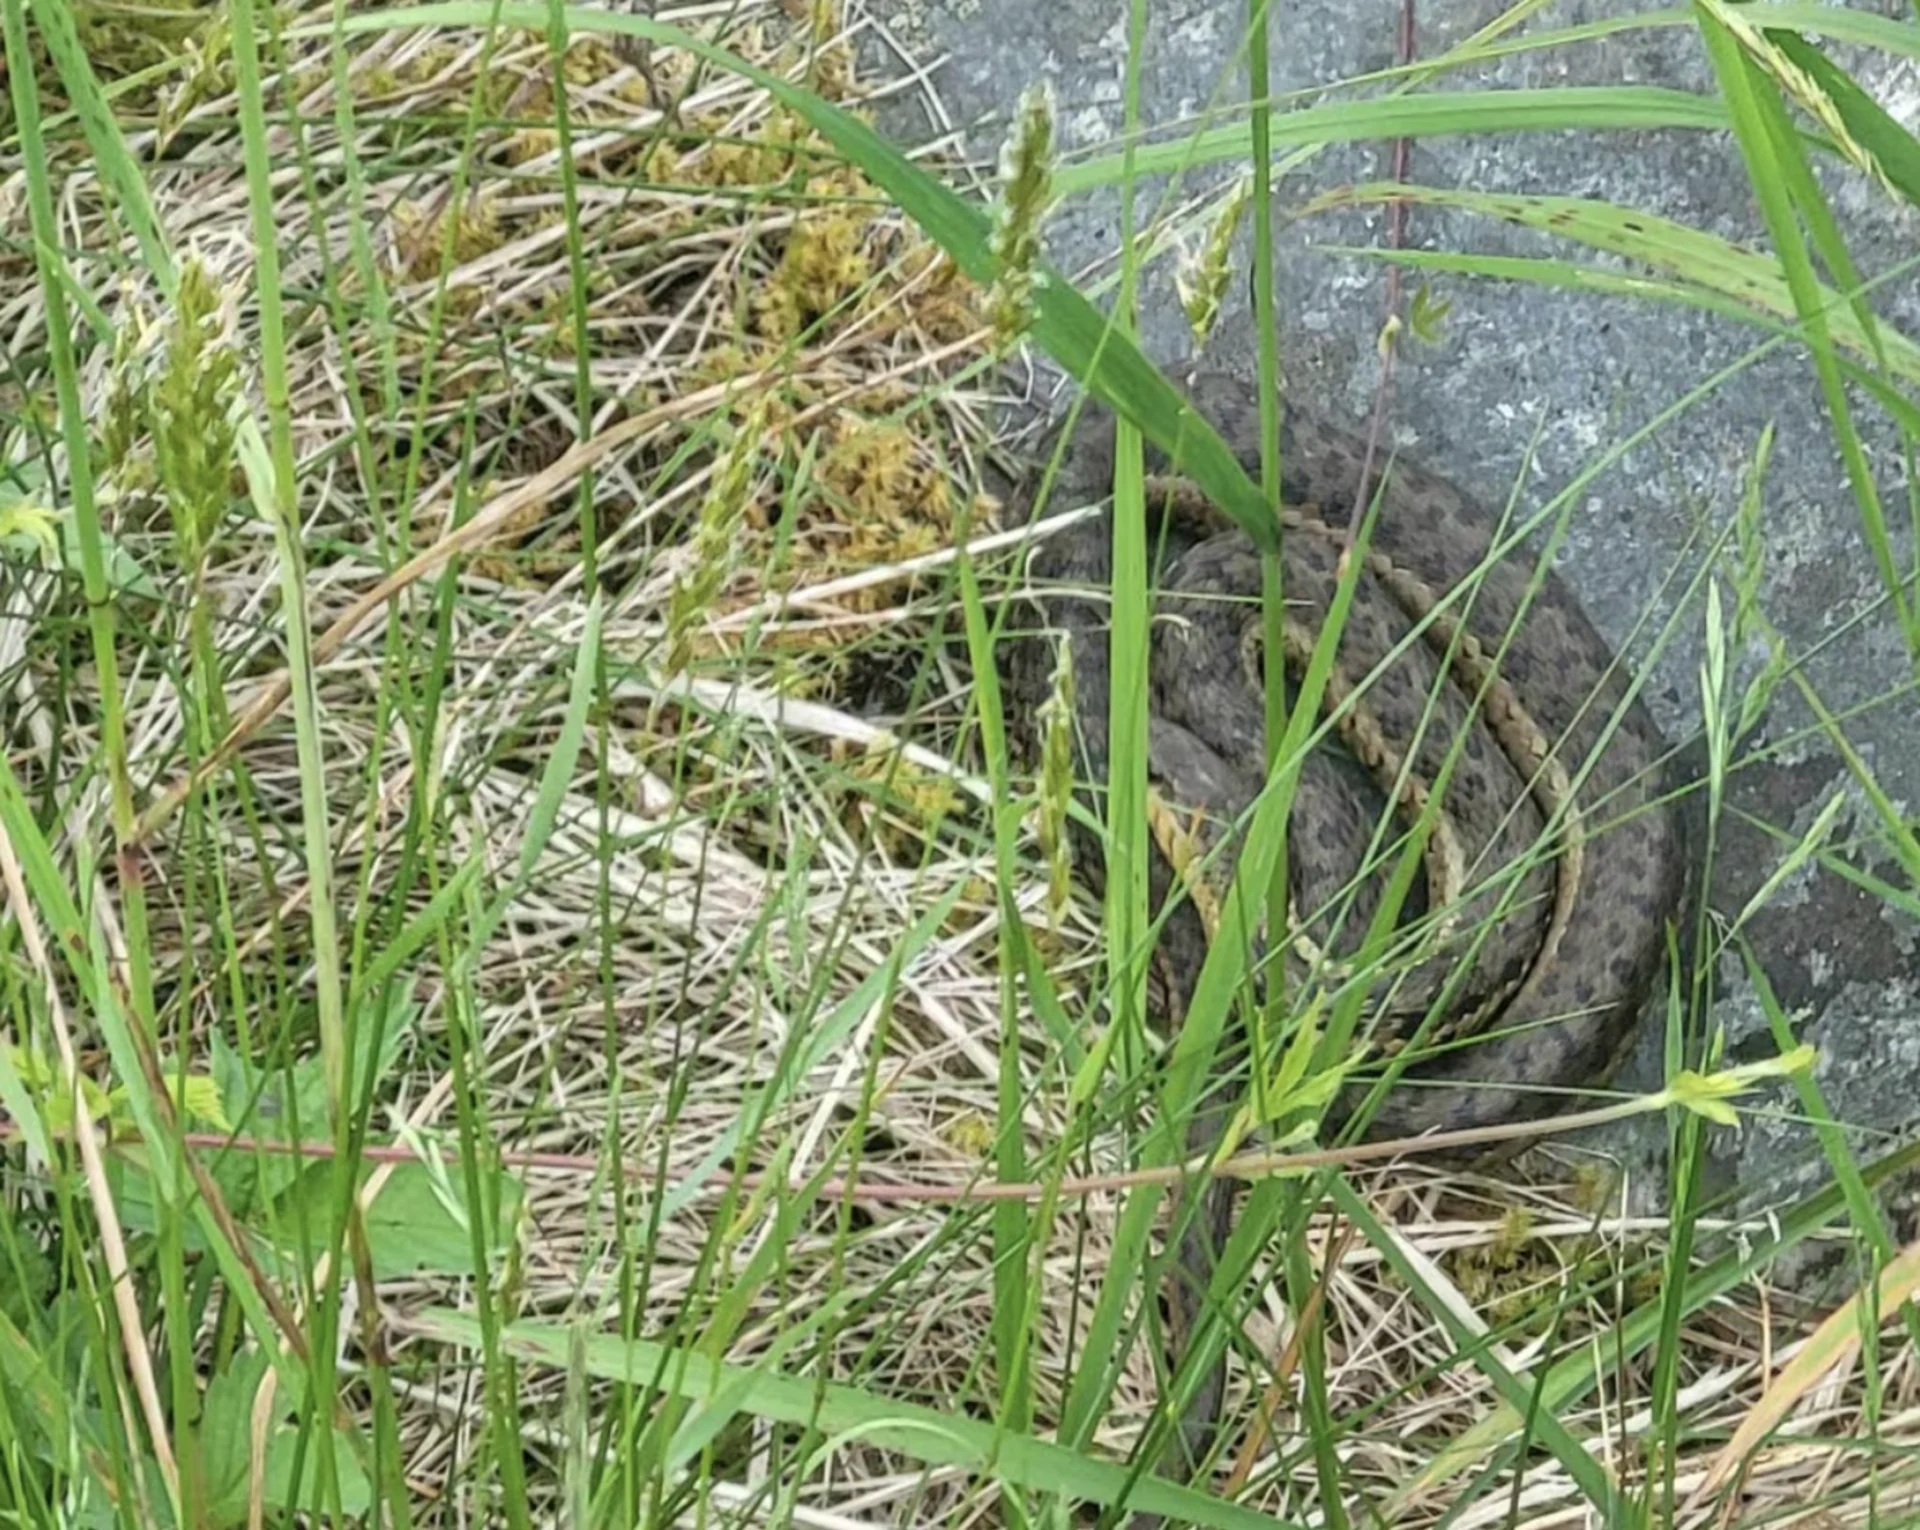 This snake was found in Trout River. (Submitted to CBC by Julia Riley)